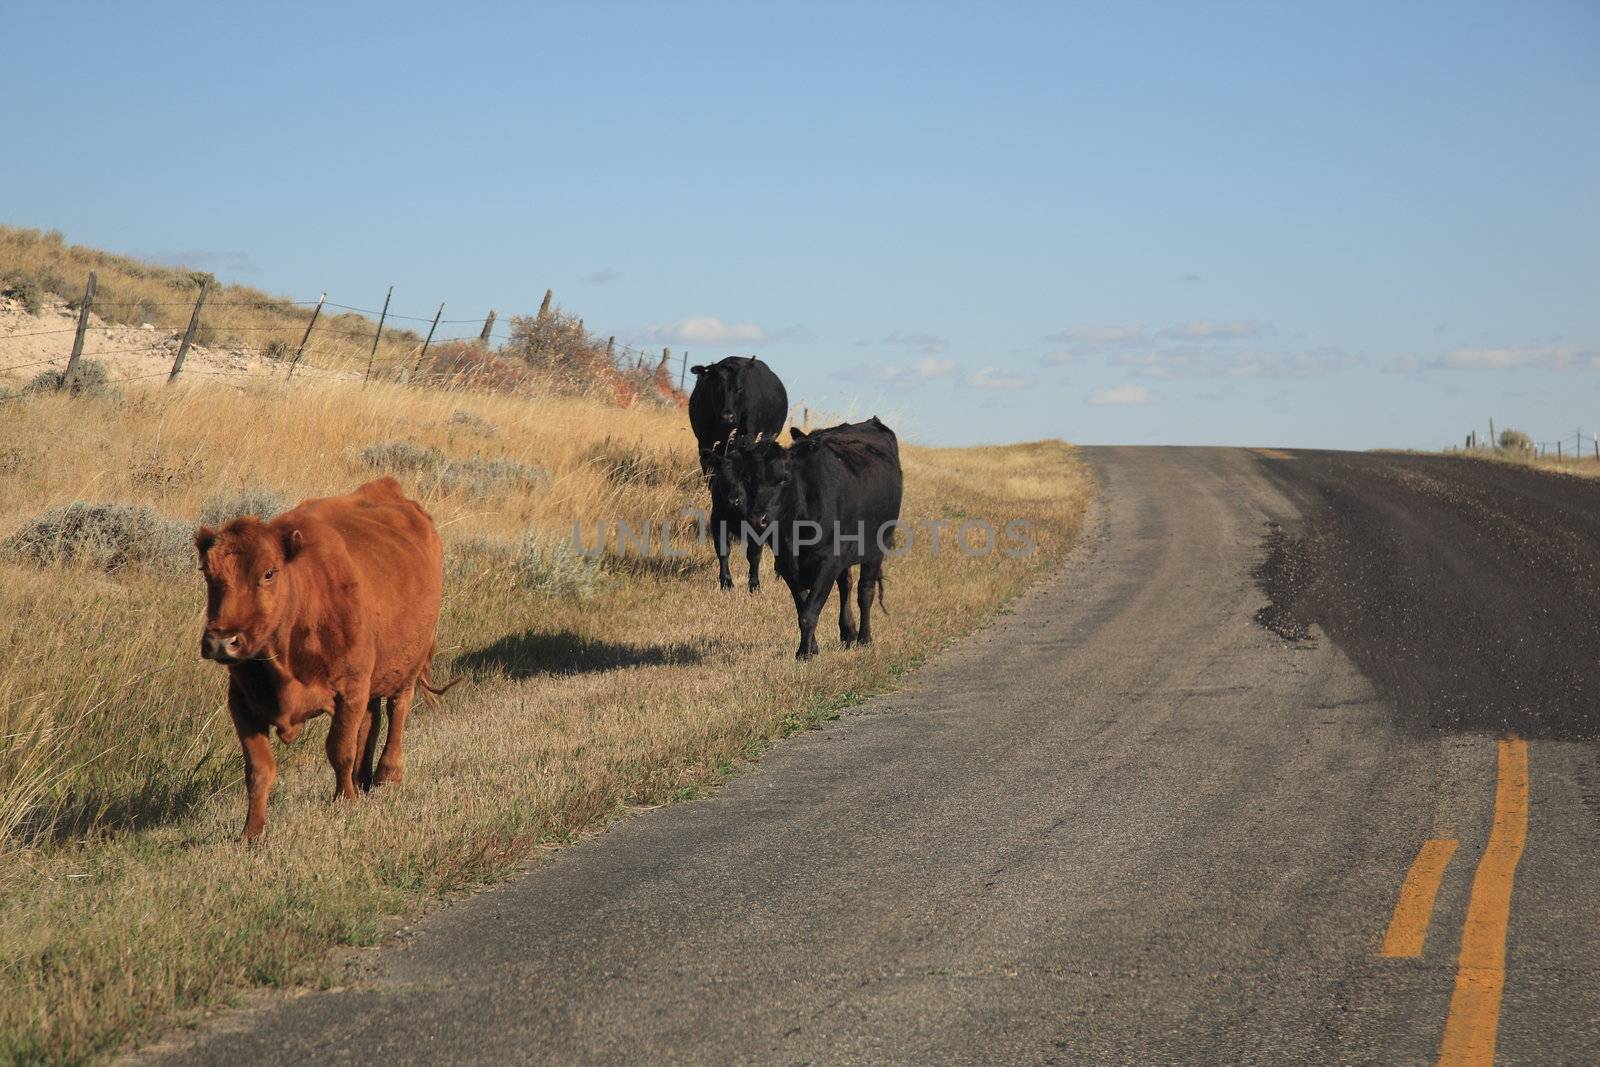 Wyoming Road and Cows by Ffooter